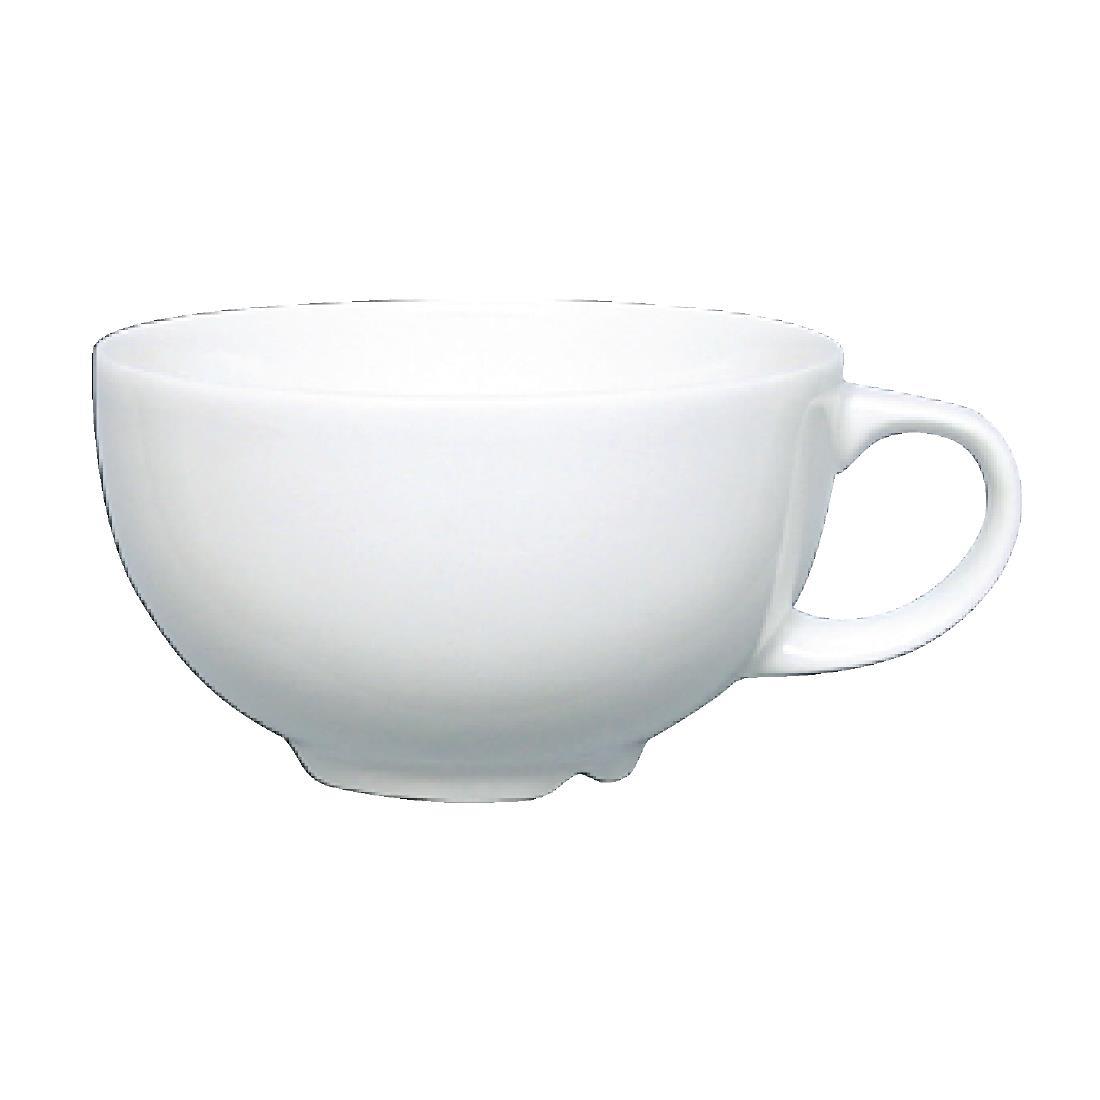 Churchill Alchemy Cappuccino Cups 227ml (Pack of 24) - C759  - 1